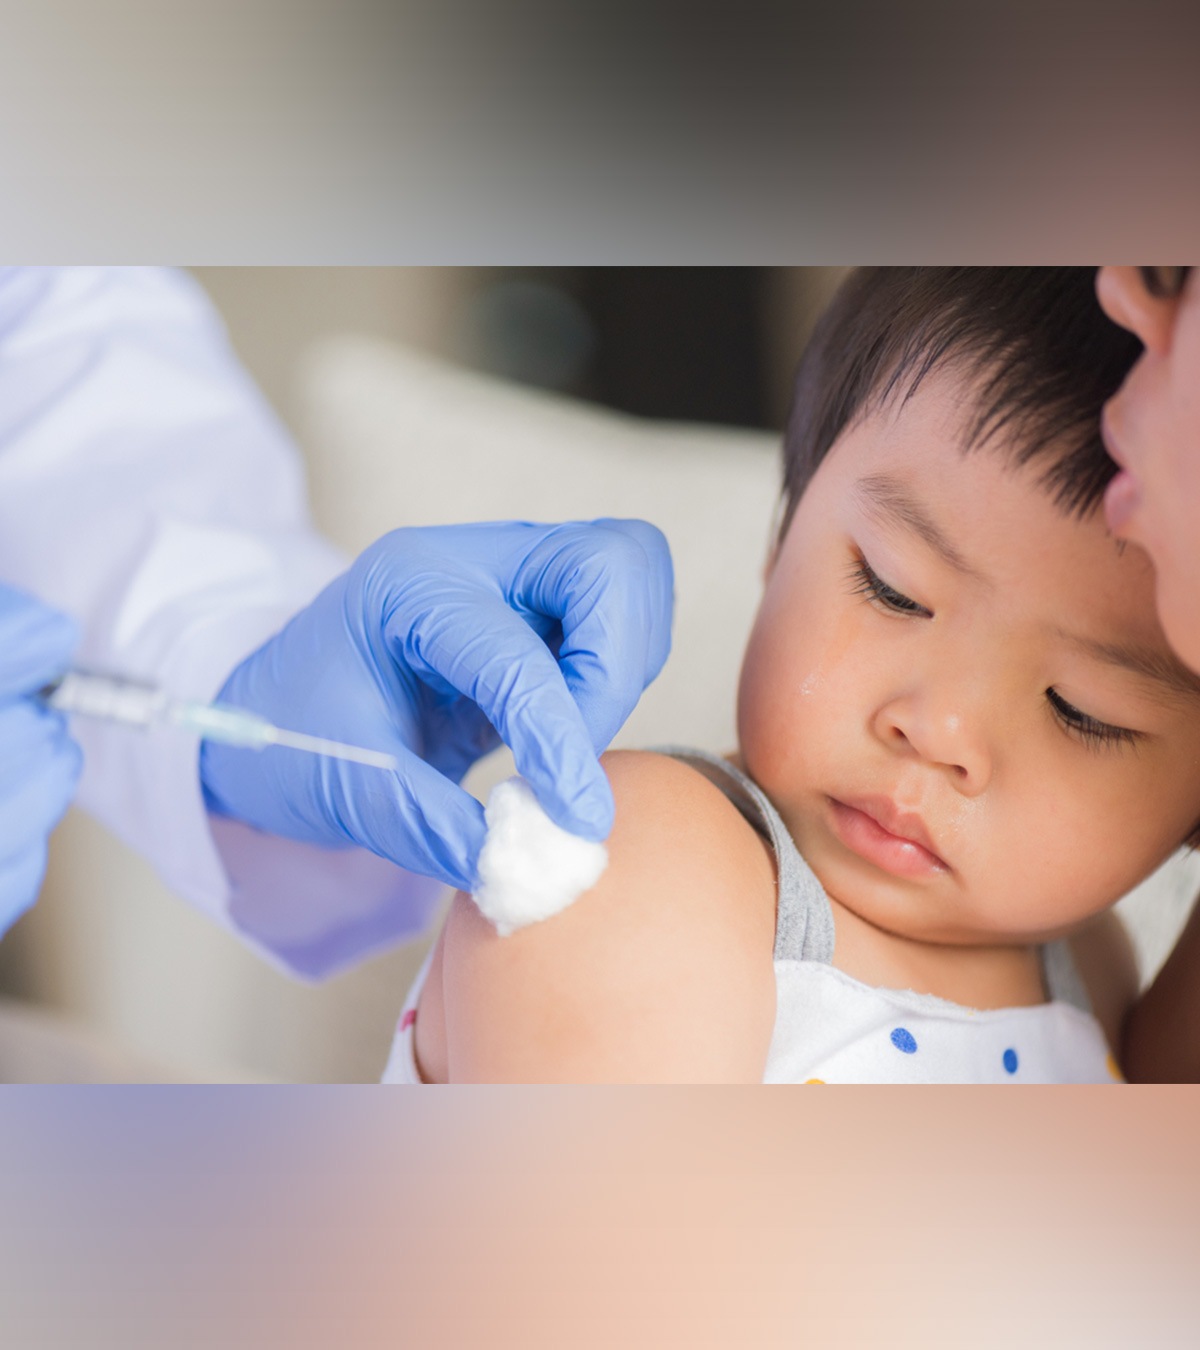 Here’s What Parents Need To Know About Childhood Vaccination Amid COVID-19